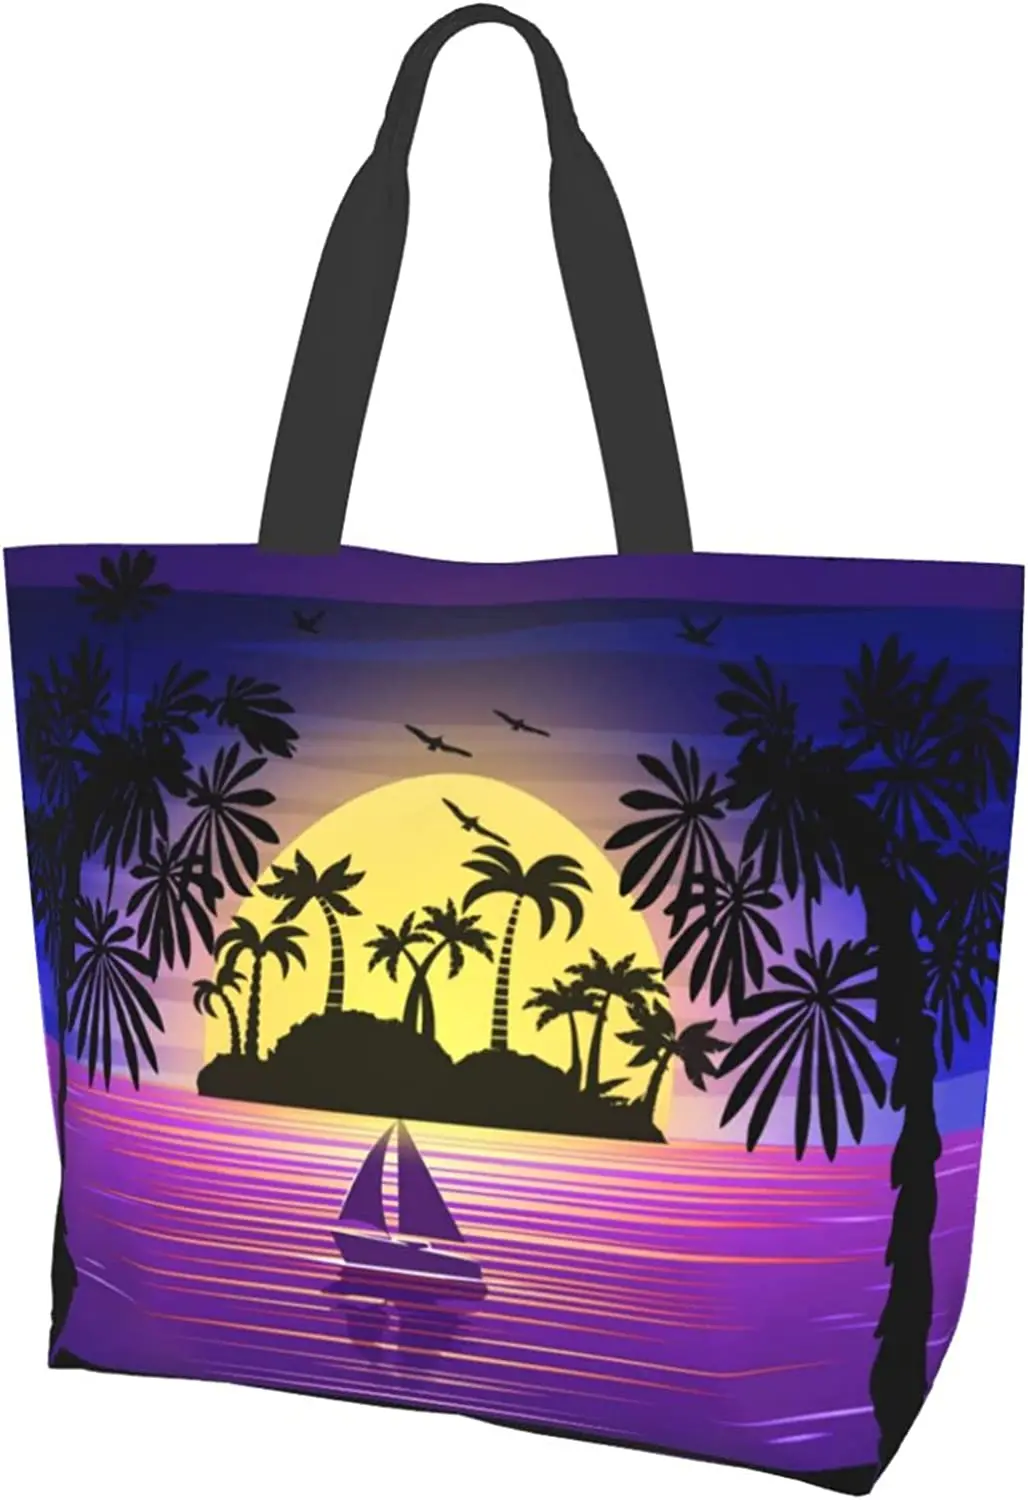 

Sunset Beach Tote Bag Women Large Capacity Shoulder Grocery Shopping Bags